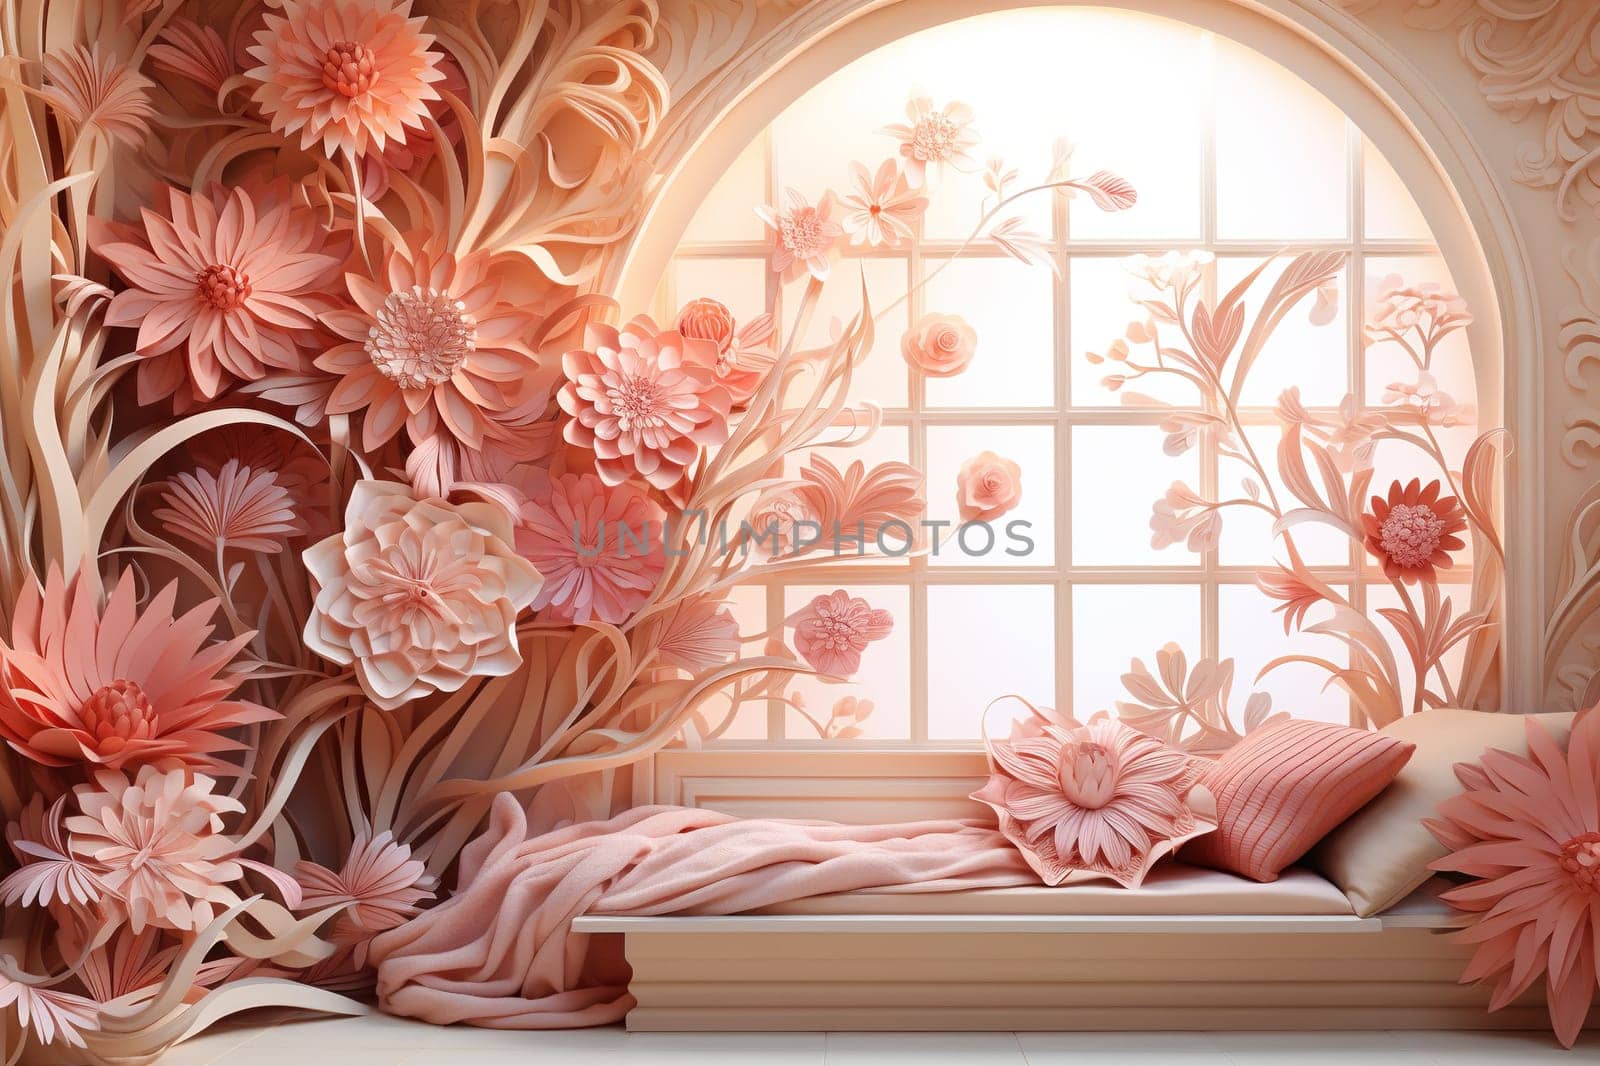 Room interior in cut paper style. 3D flowers in pink tones.